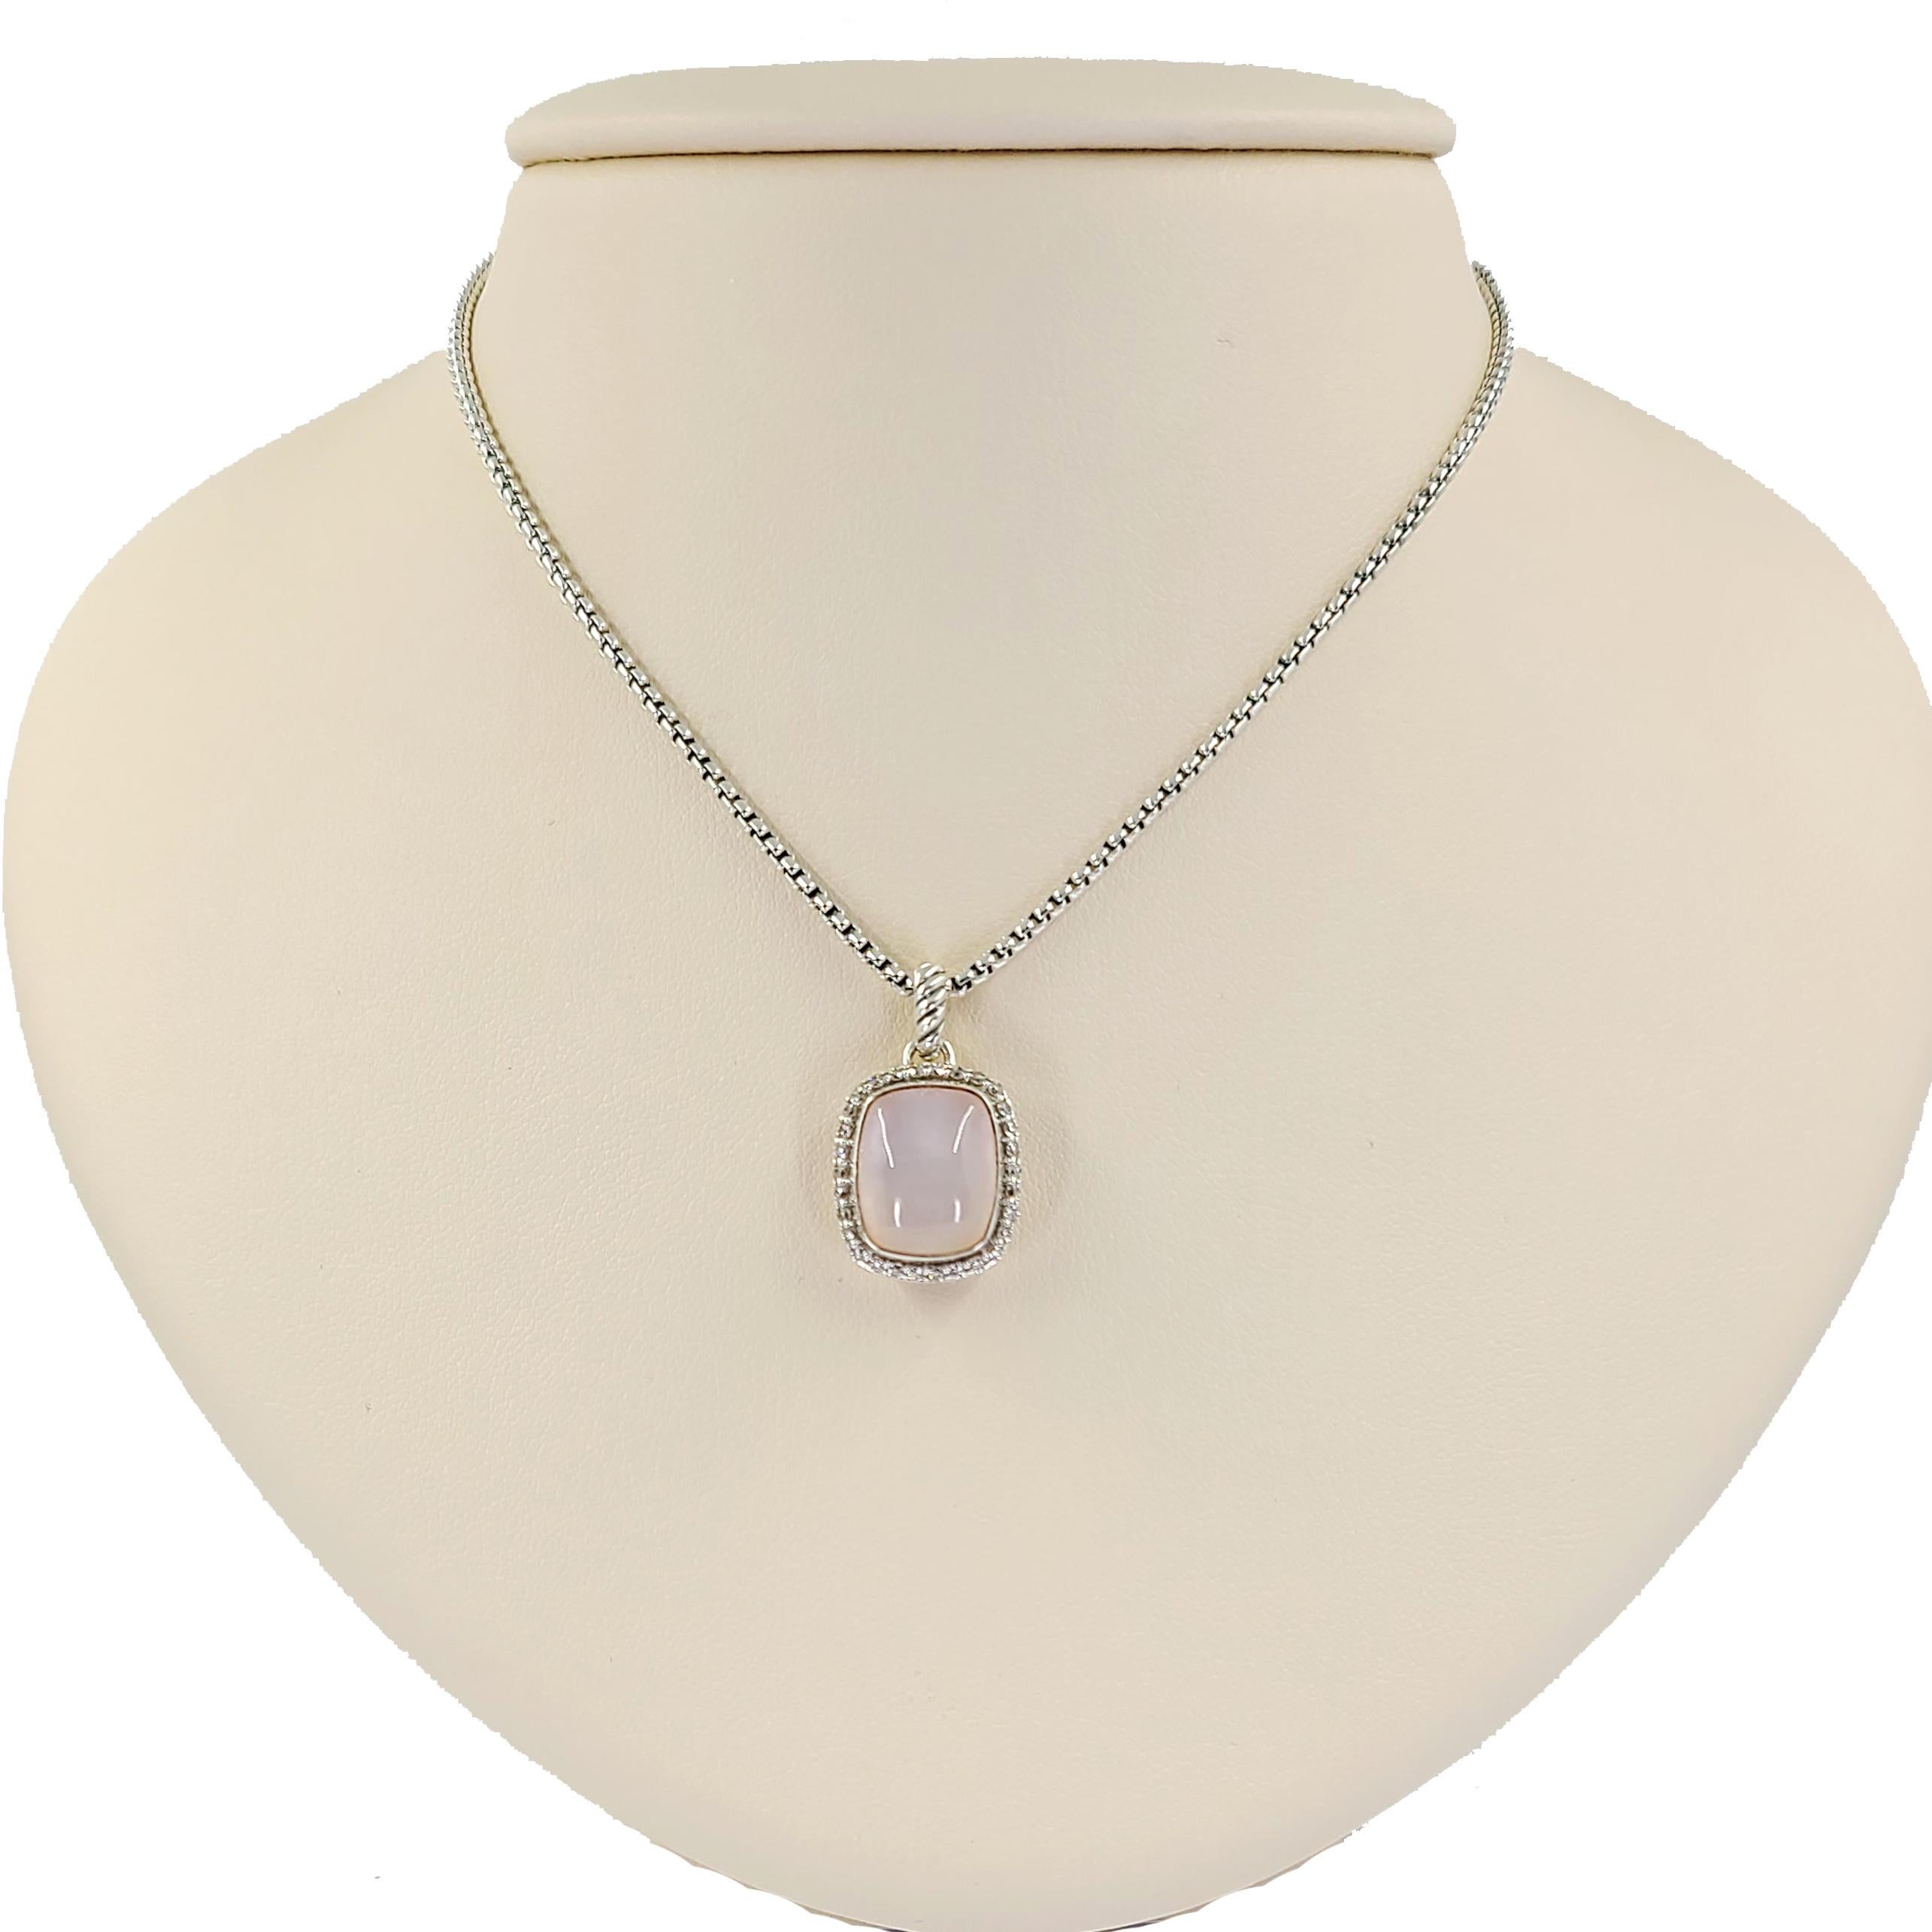 David Yurman Sterling Silver Pendant Necklace Featuring A Cushion Cabochon Rose Quartz & Mother-of-Pearl Doublet Surrounded By Diamonds. Rounded Box Chain Measures 17 Inches Long With Additional Jump Ring At 15.5 Inches. Original MSRP $1,475.